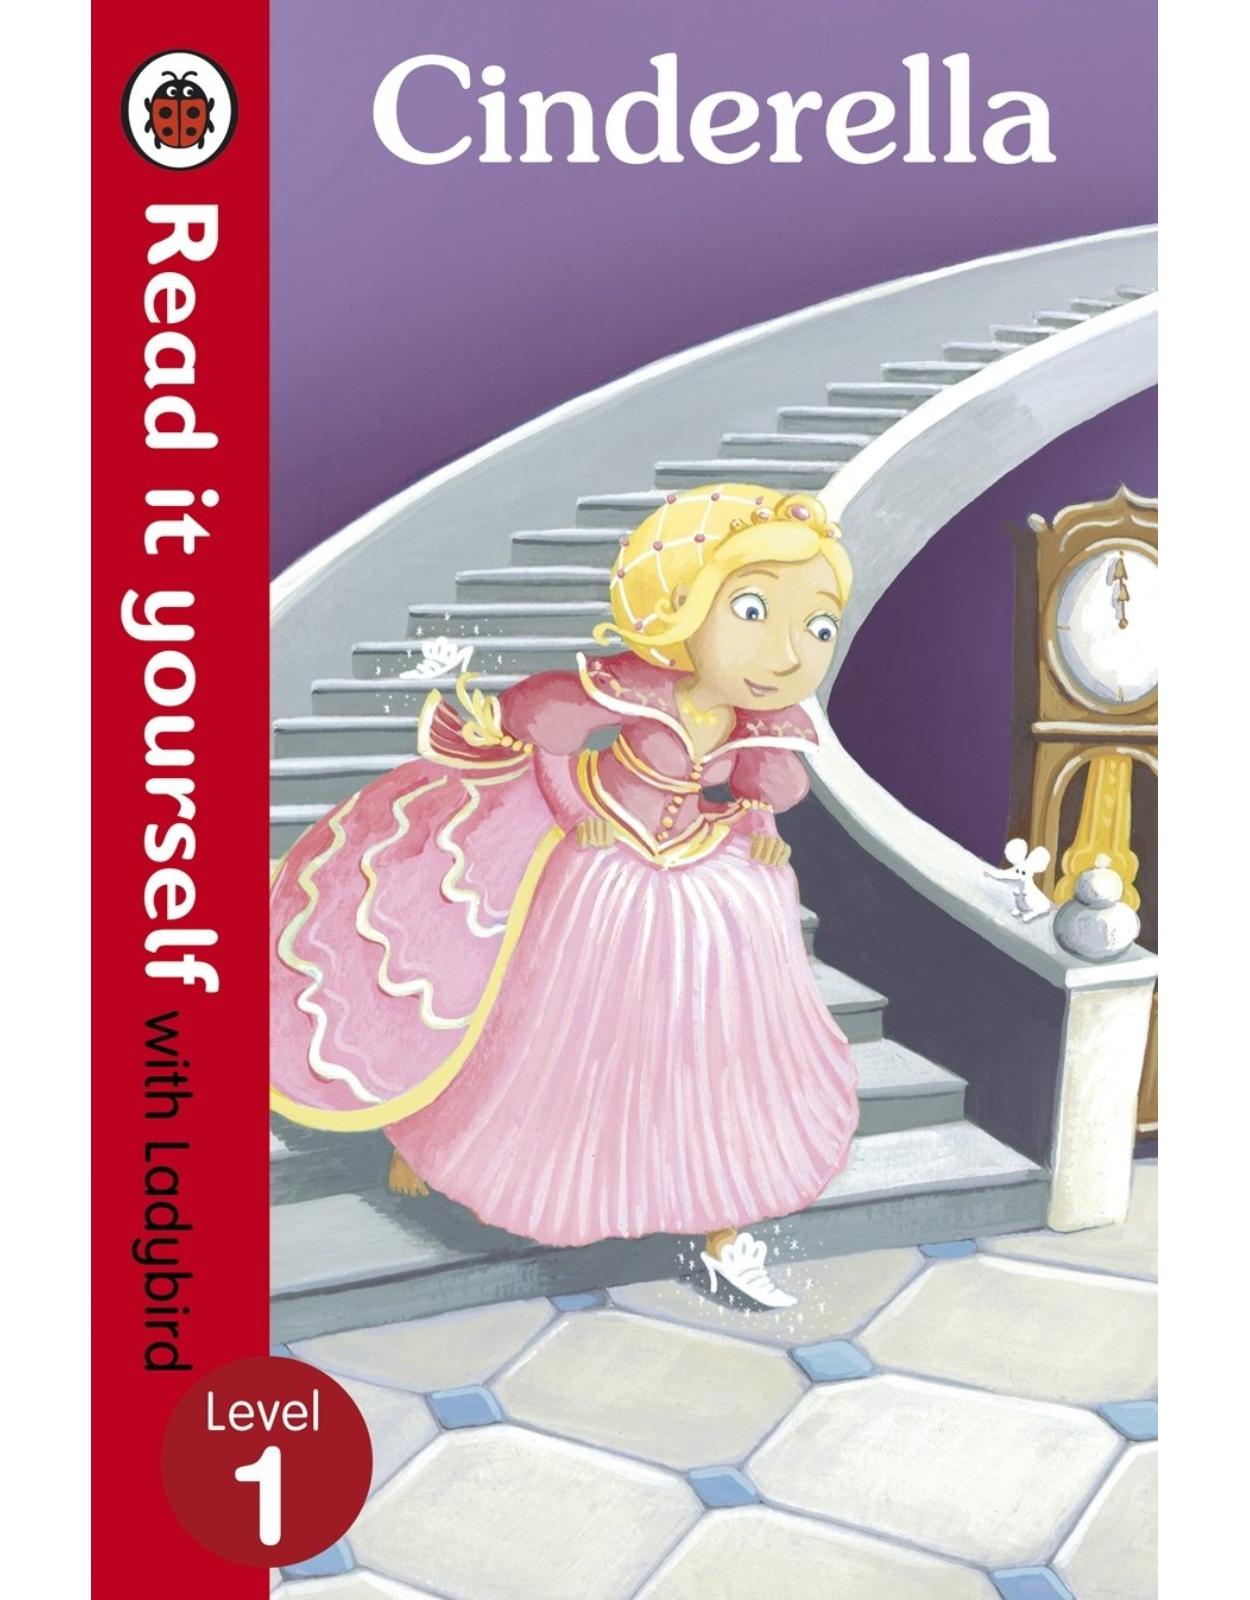 Cinderella - Read it yourself with Ladybird: Level 1